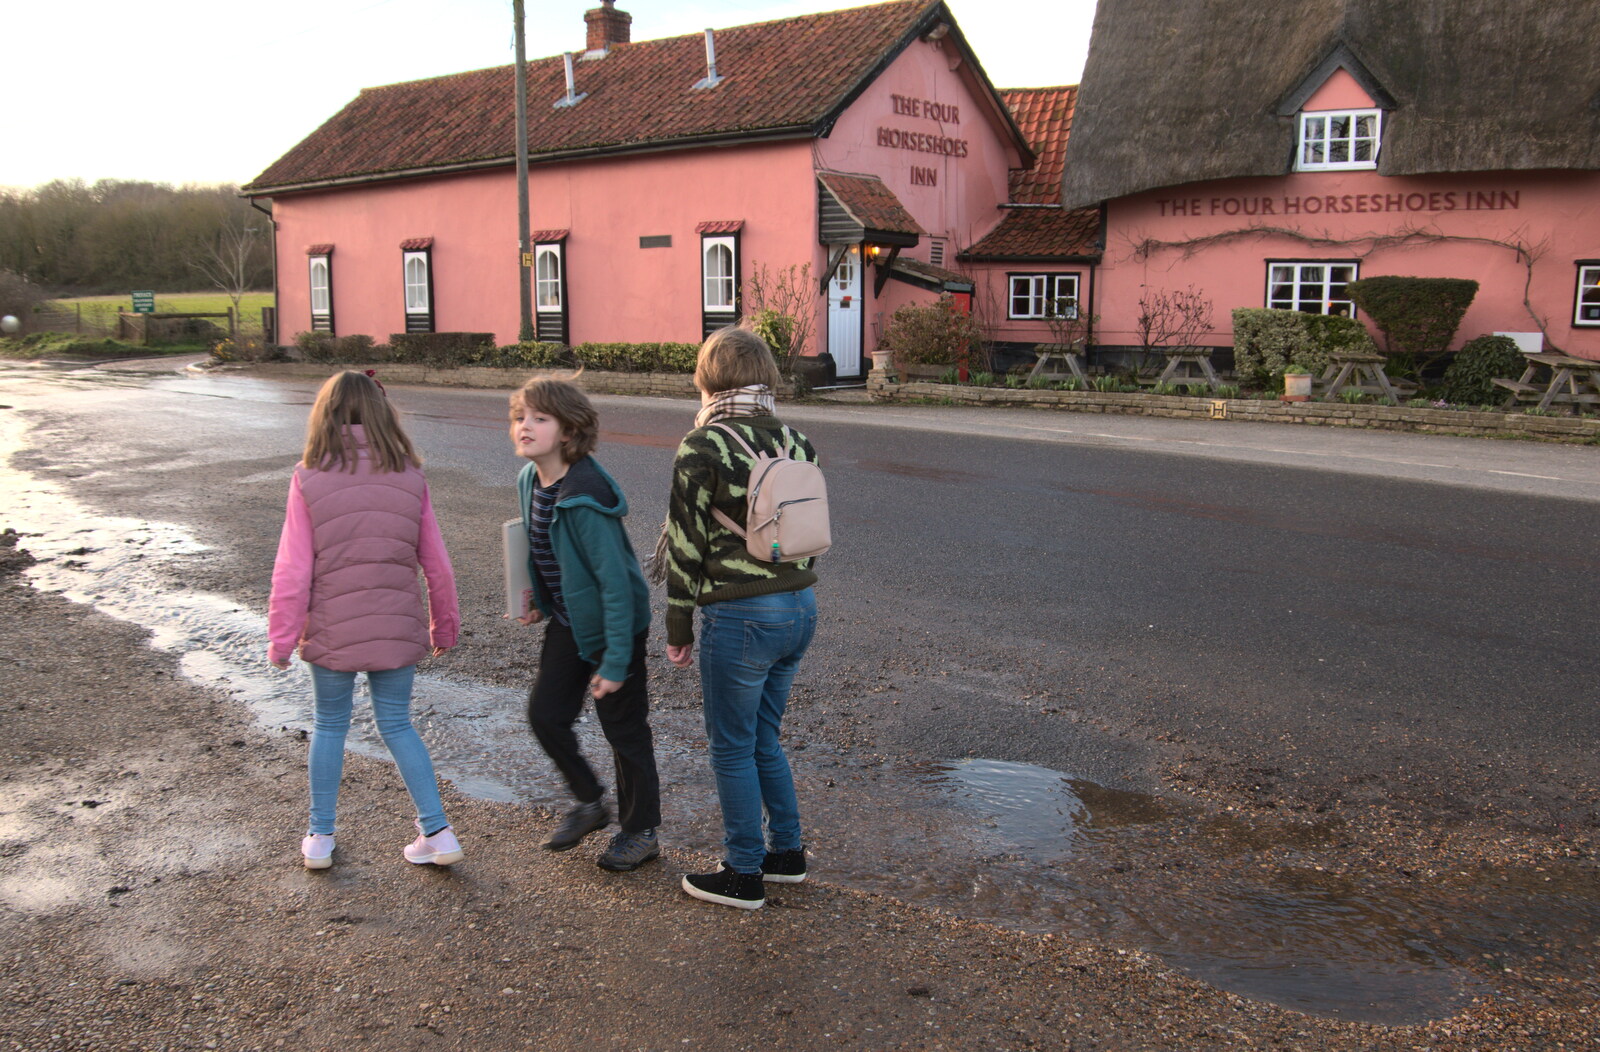 Hanging around by the puddles from Sunday Lunch and a SwiftKey Trip to Nando's, Thornham and Bayswater - 22nd February 2020